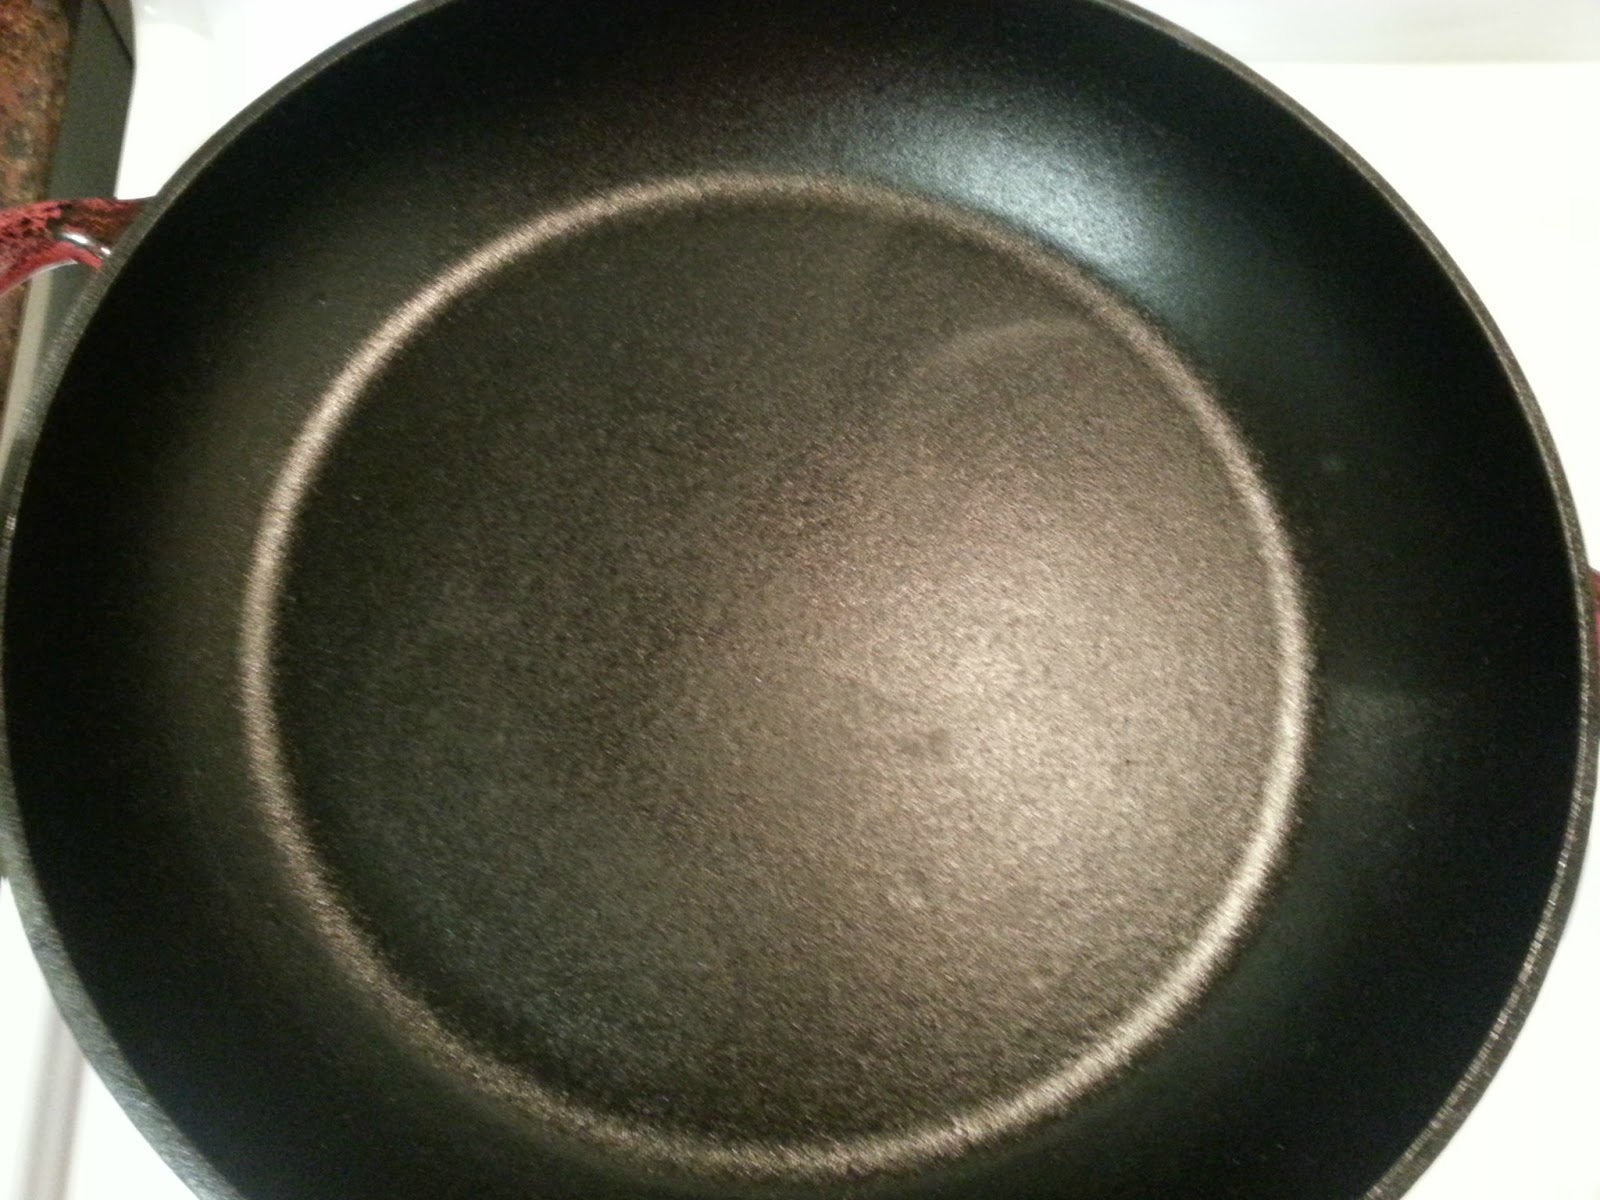 Cast Iron Seasoning…What's It All About?